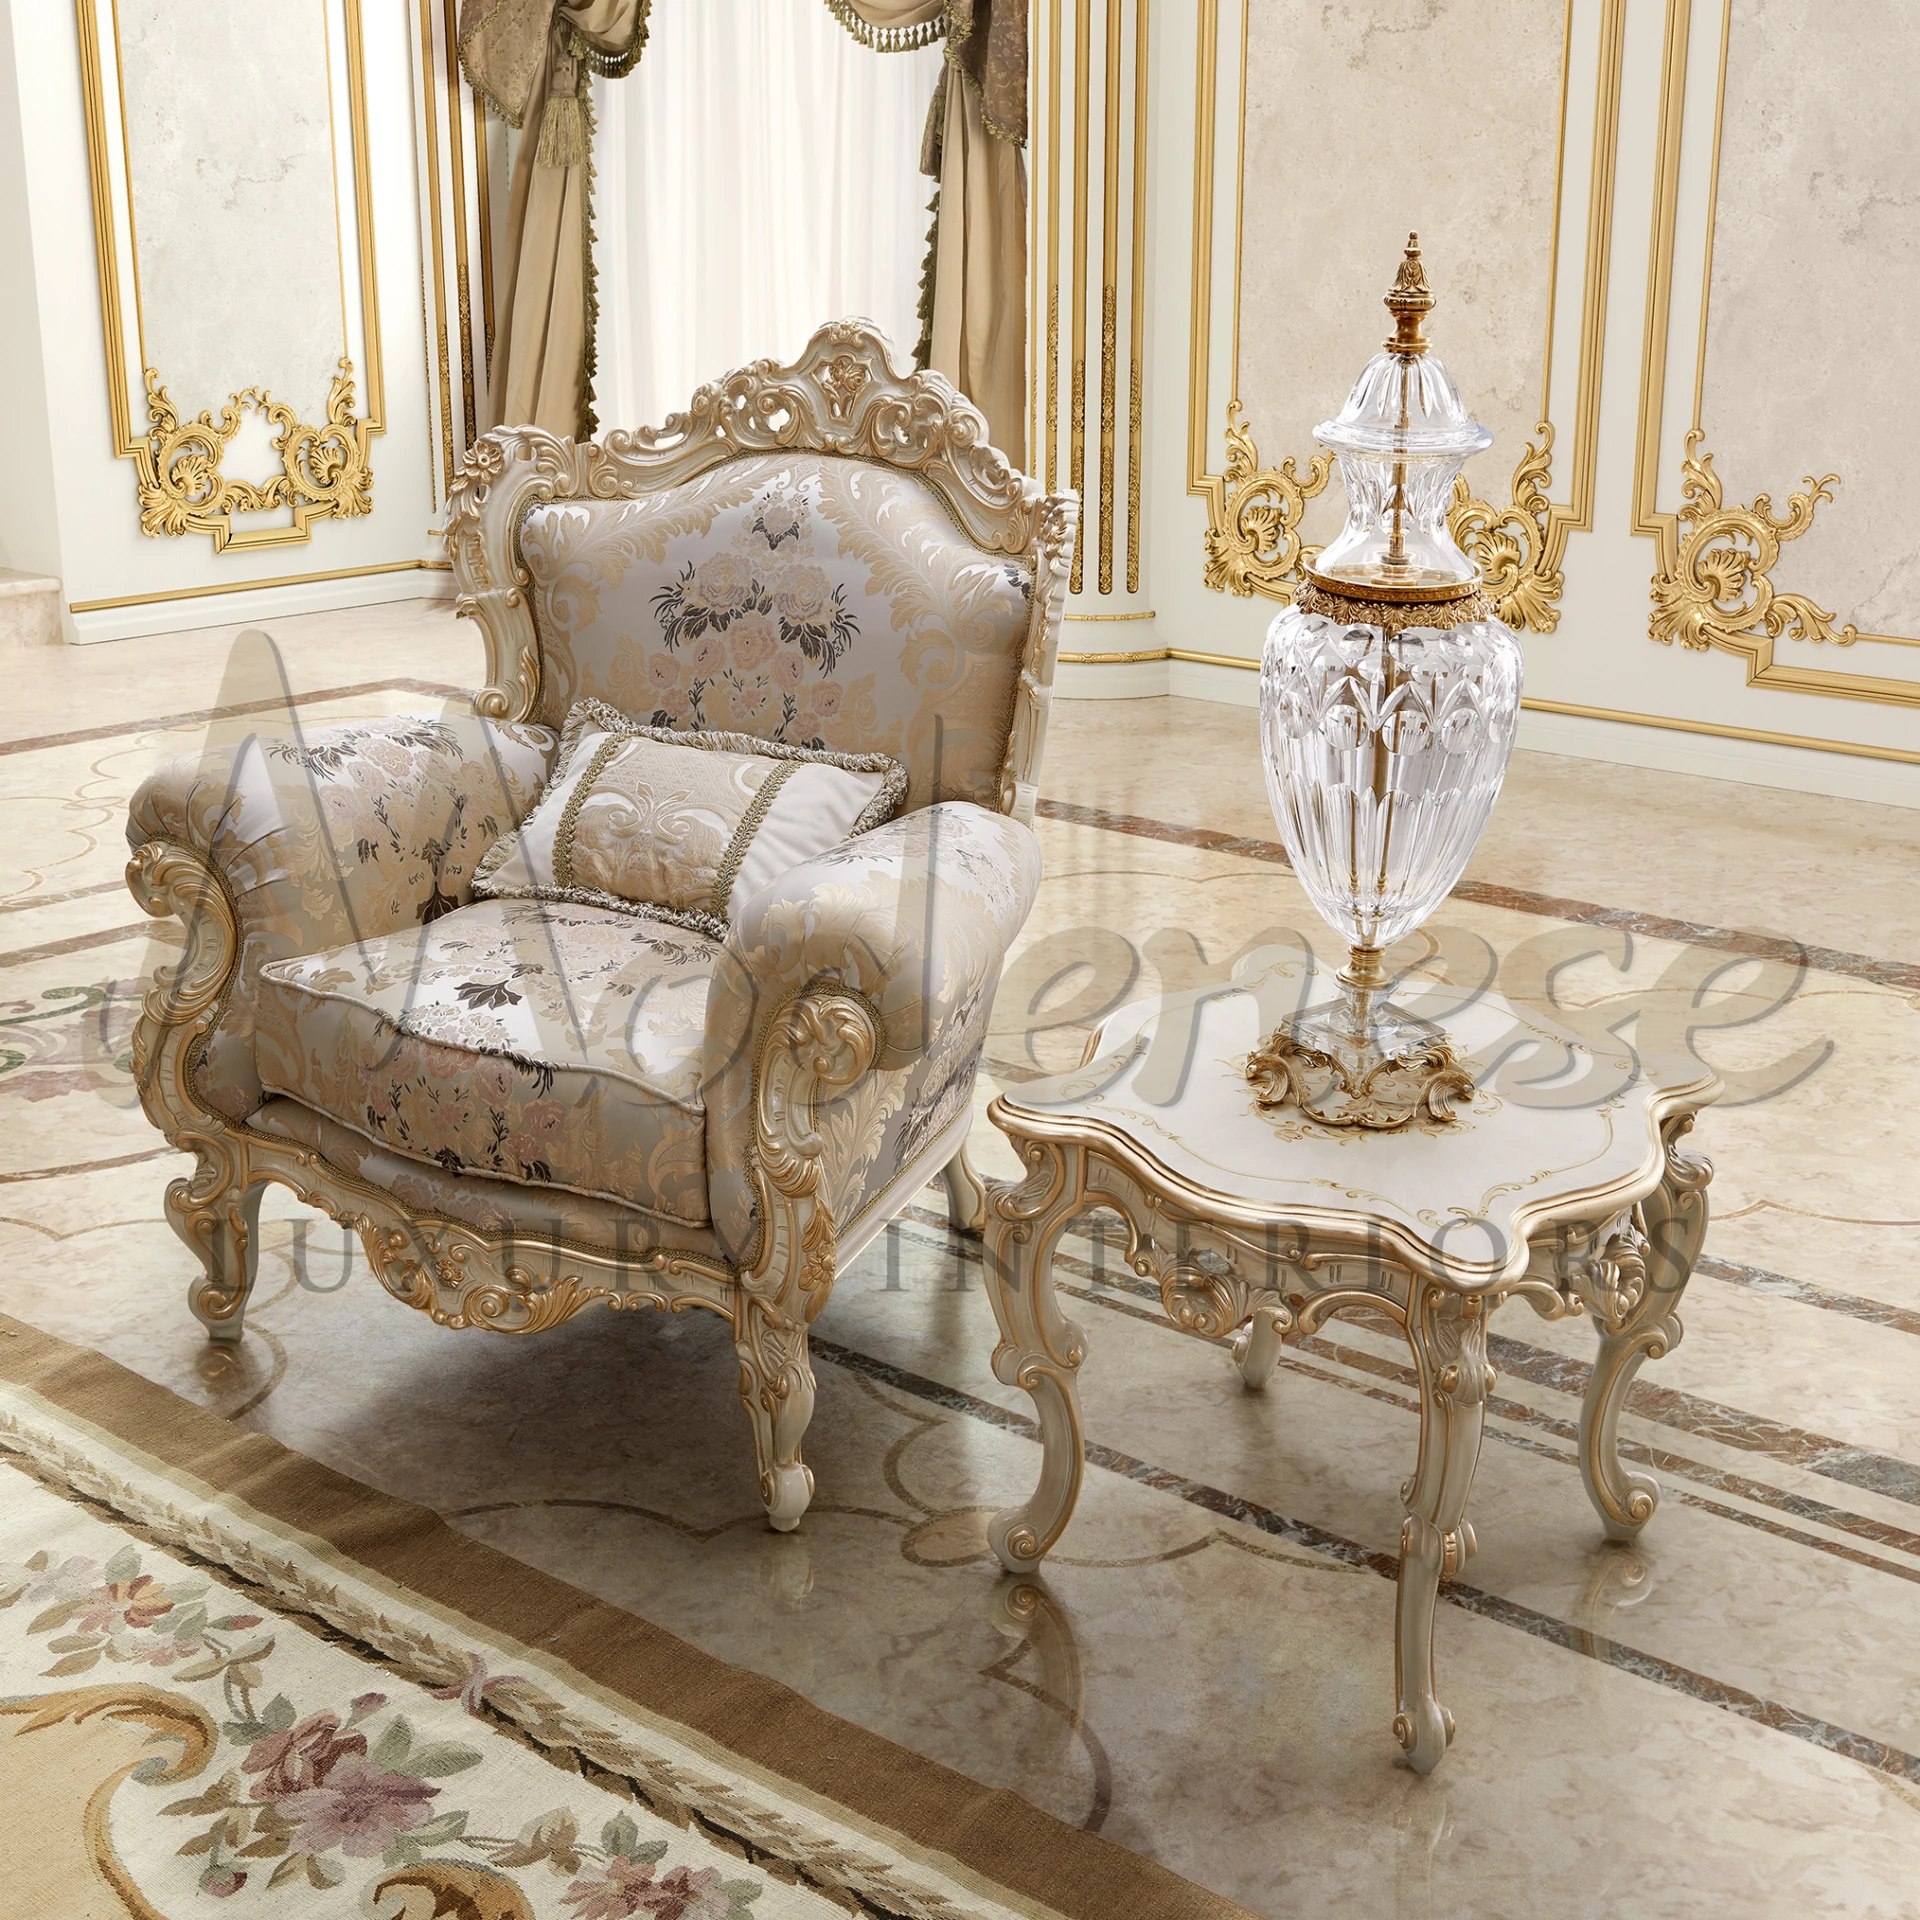 Elegant armchair with ivory lacquered finish and gold leaf details, featuring comfortable upholstery in baroque design.